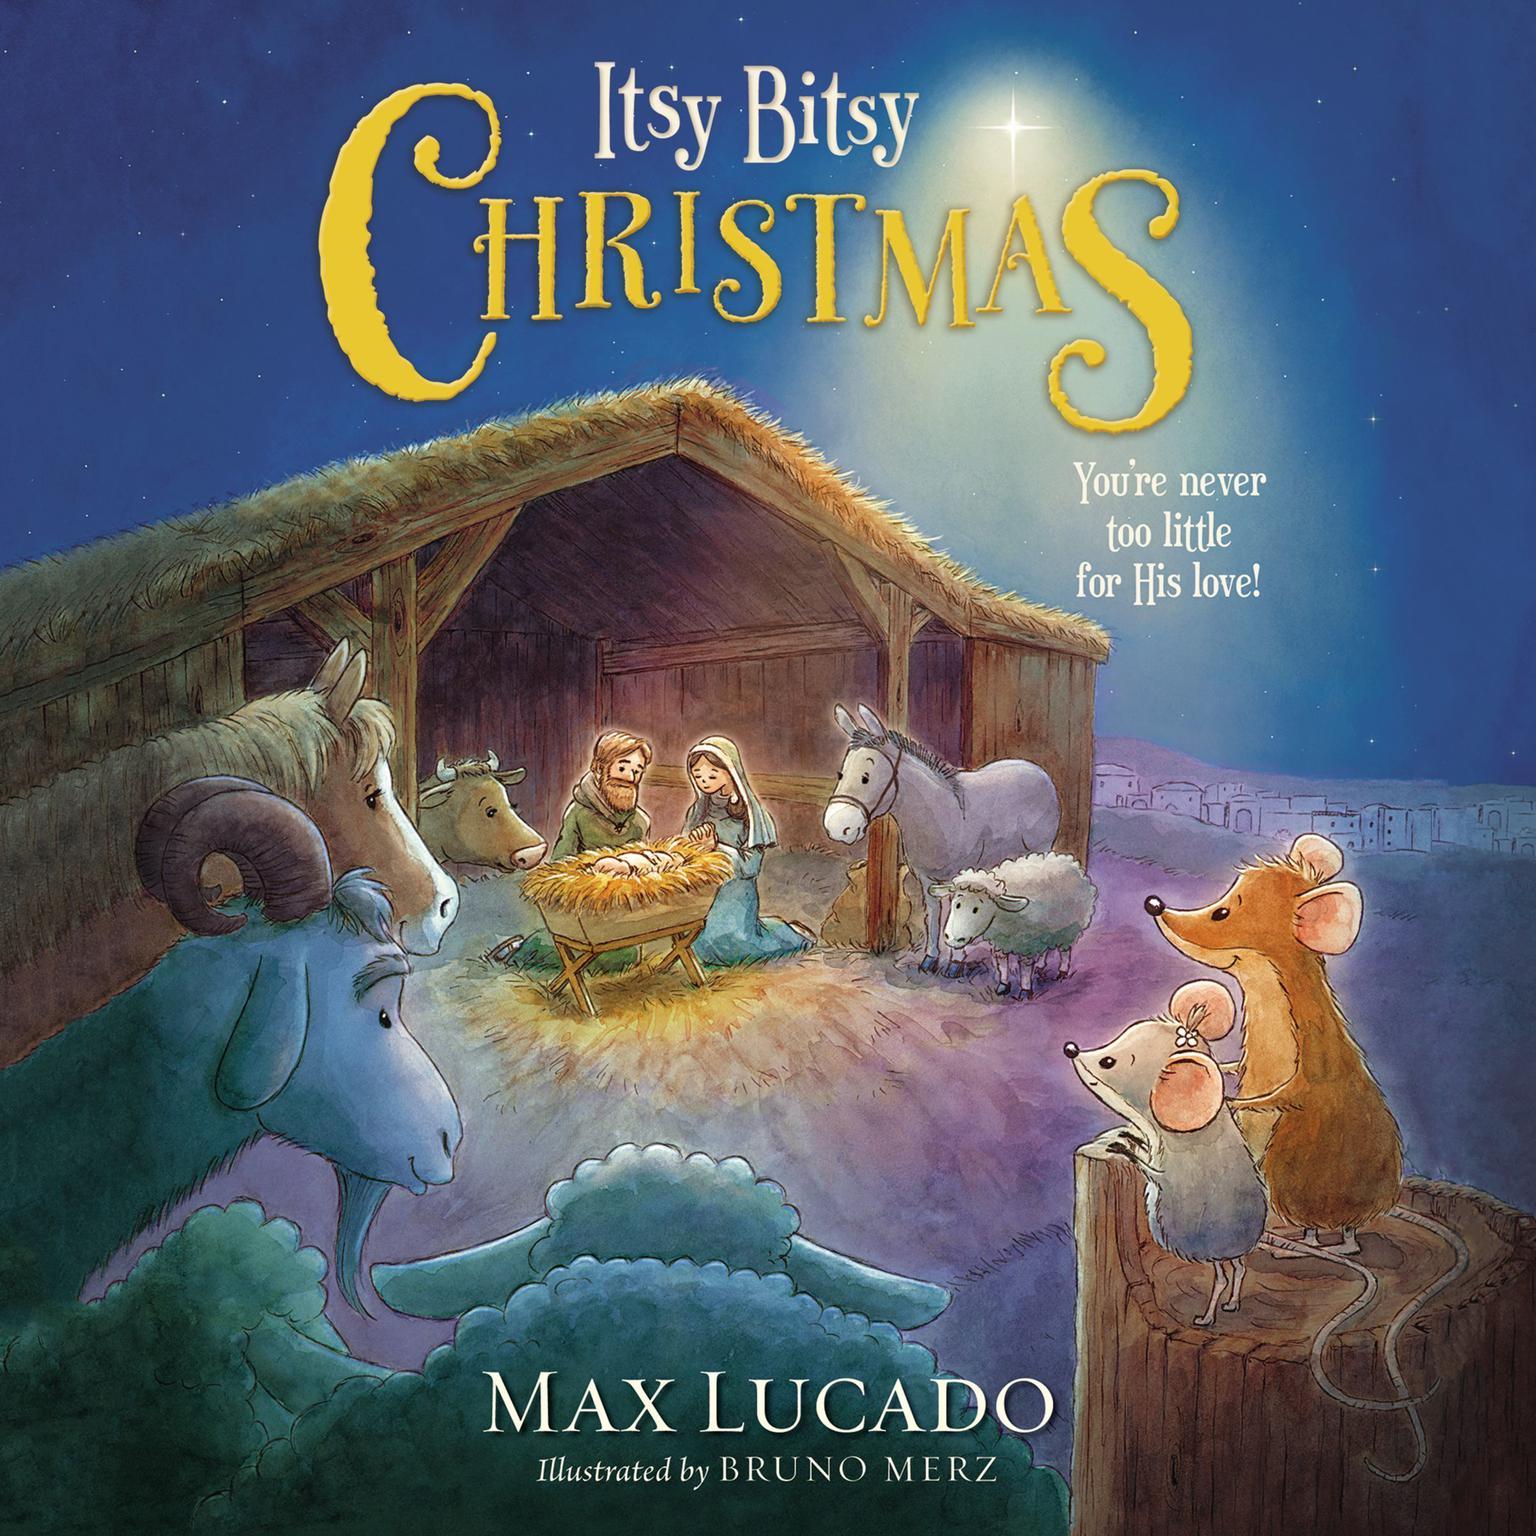 Itsy Bitsy Christmas: A Reimagined Nativity Story for Advent and Christmas Audiobook, by Max Lucado